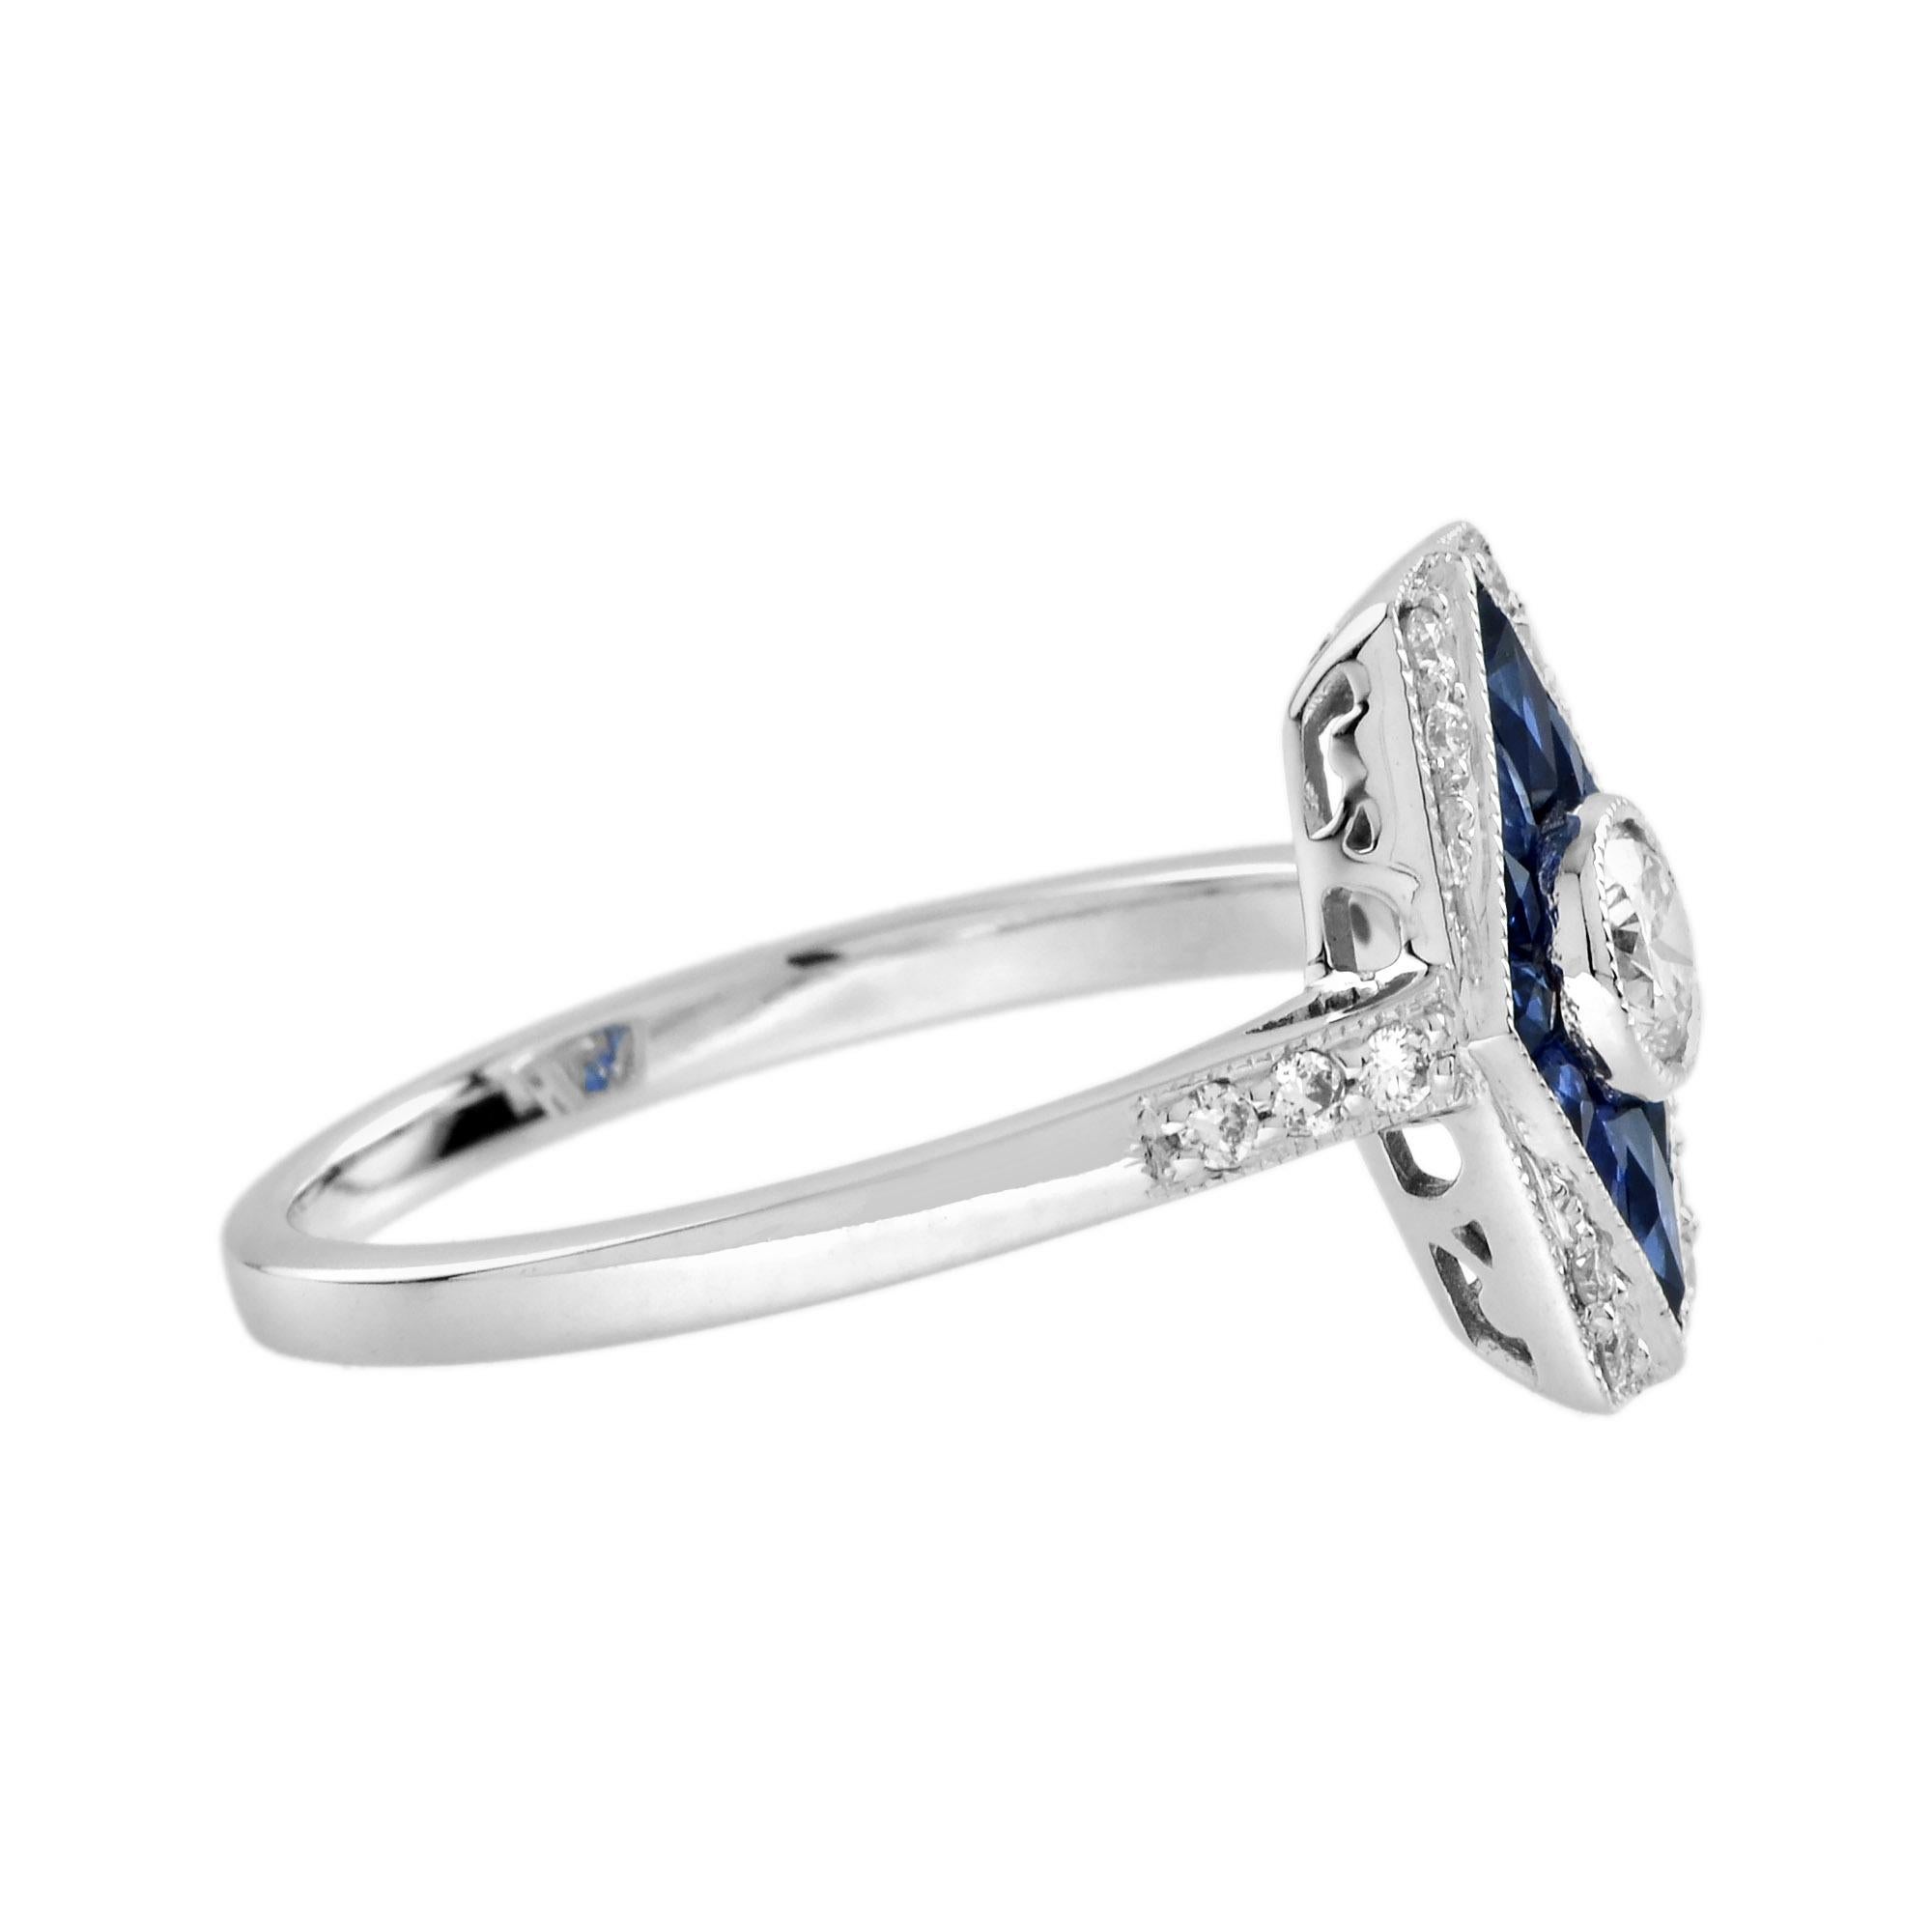 For Sale:  Diamond and Sapphire Art Deco Style Rhombus Engagement Ring in 18K White Gold  4